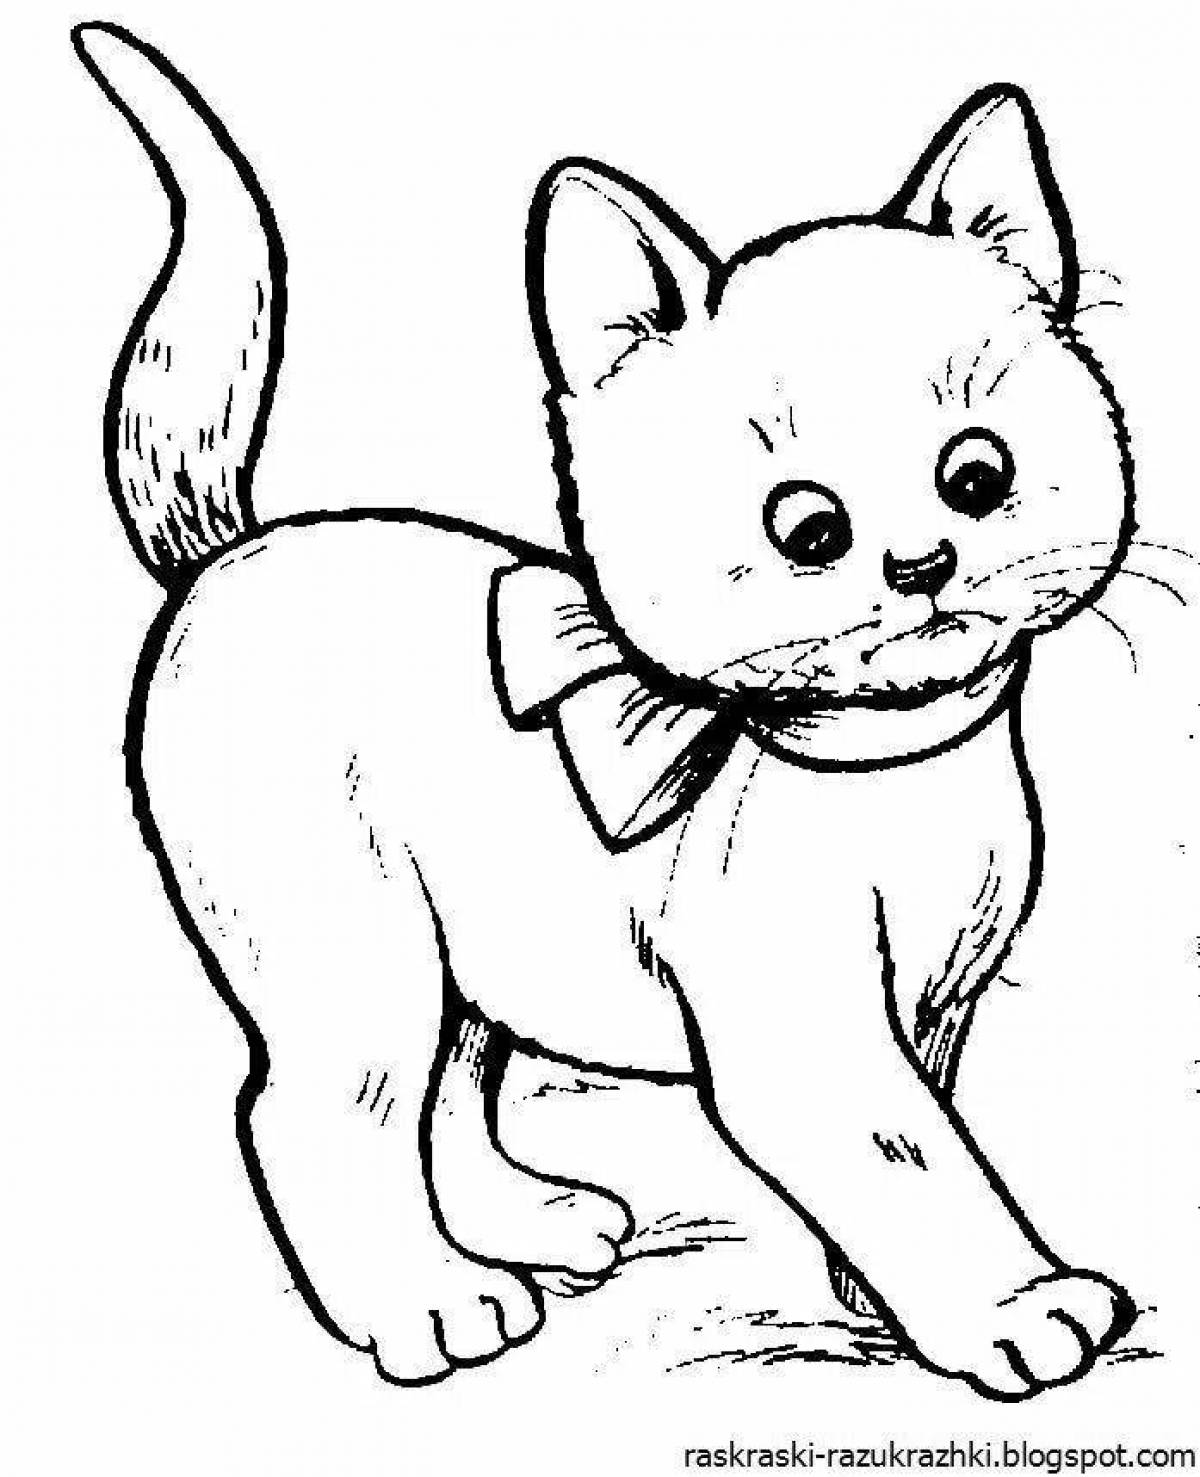 Affectionate kitten coloring page for children 2-3 years old